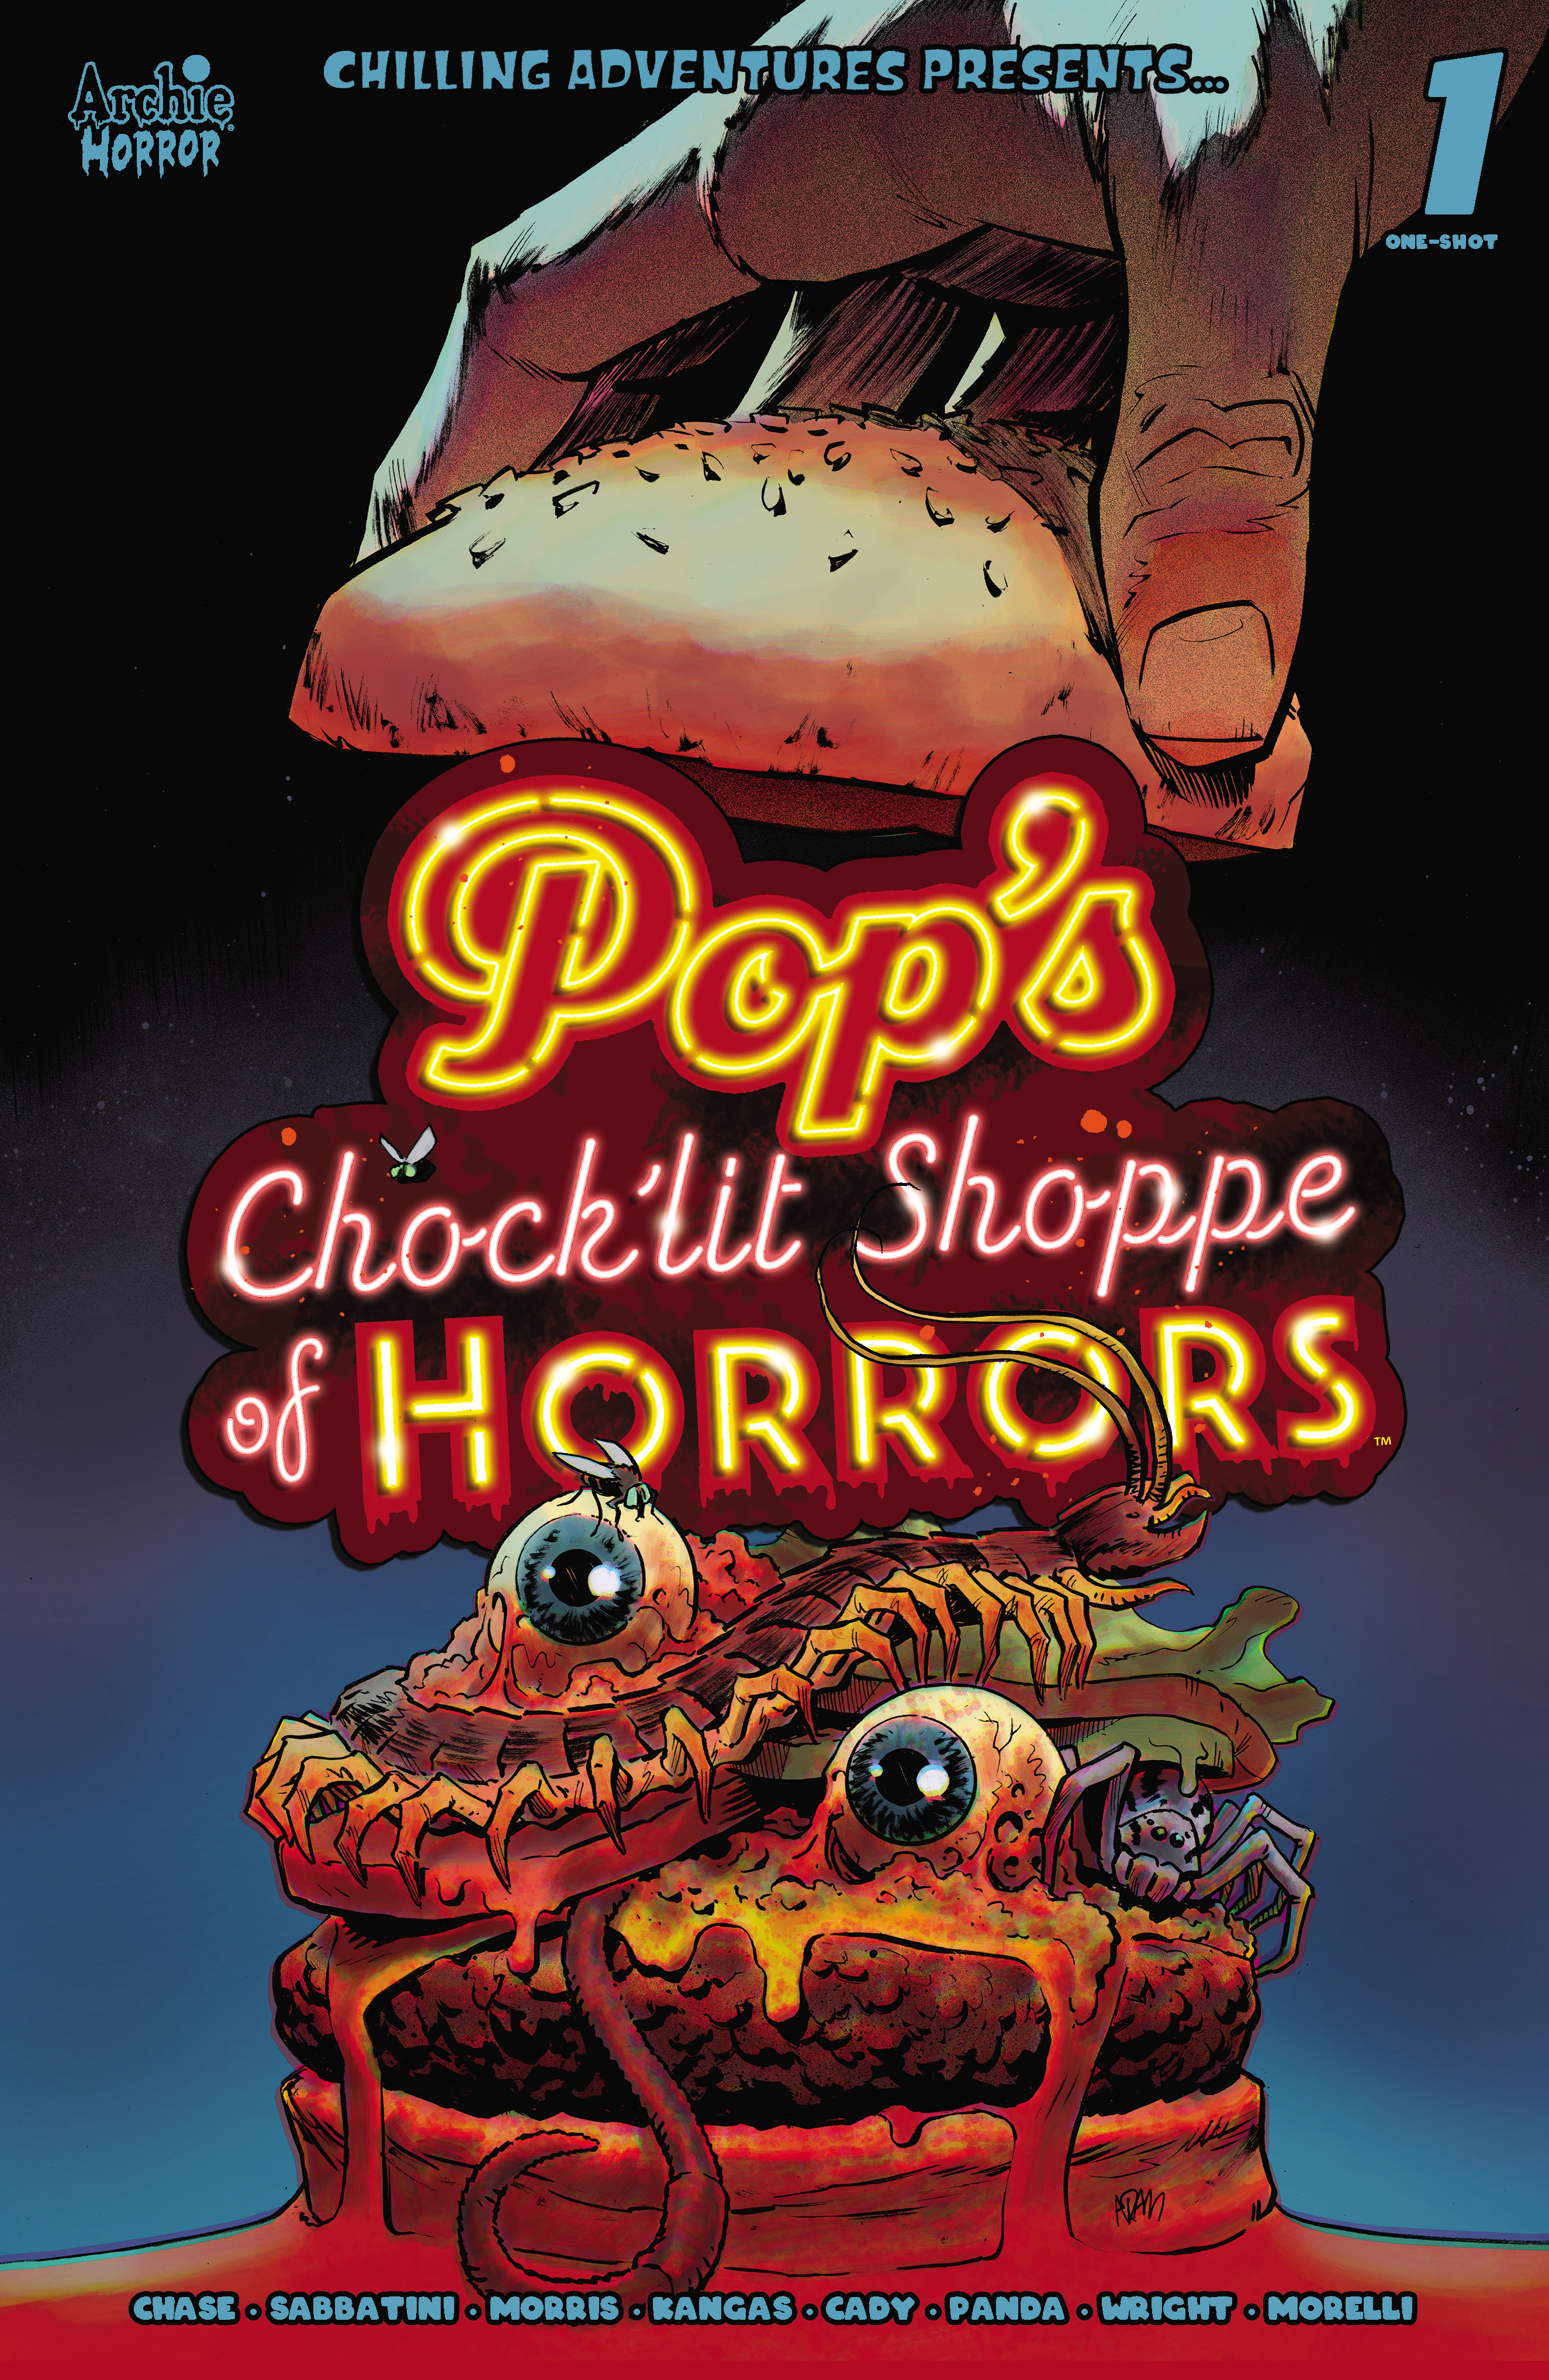 Read online Chilling Adventures Presents... Pop's Chock'lit Shoppe of Horrors comic -  Issue # Full - 1